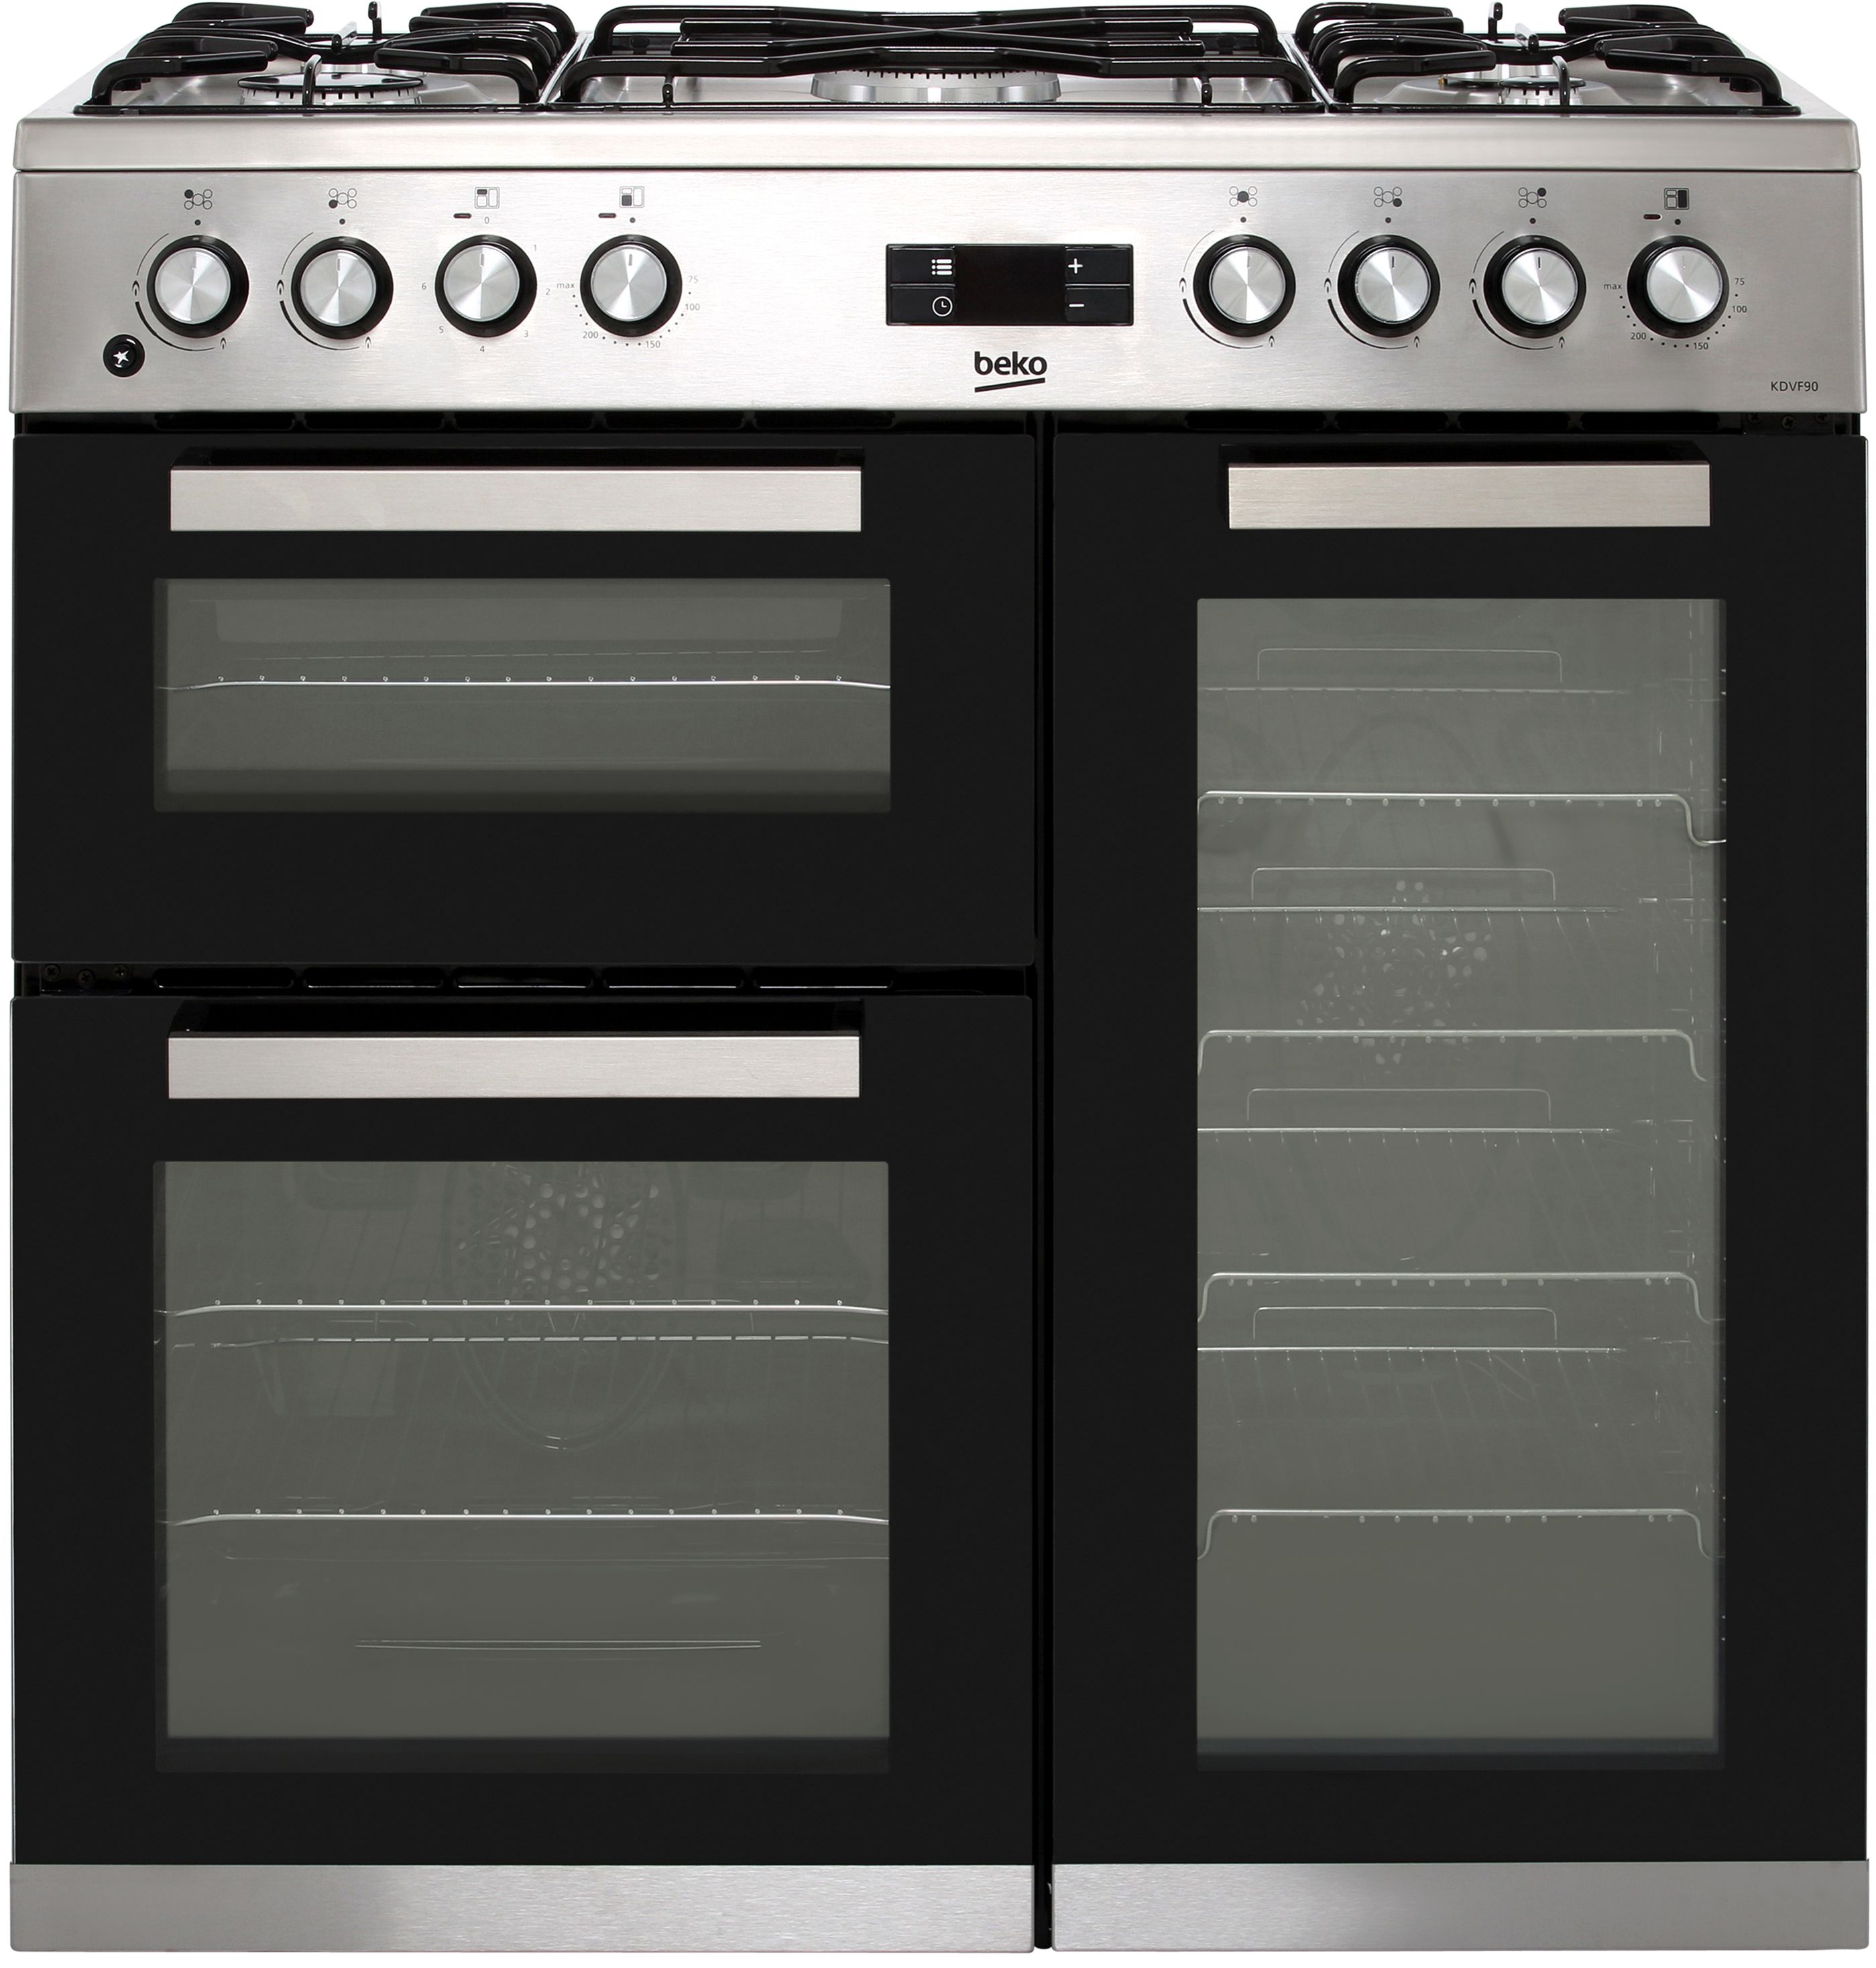 Beko KDVF90X 90cm Dual Fuel Range Cooker - Stainless Steel - A/A Rated, Stainless Steel